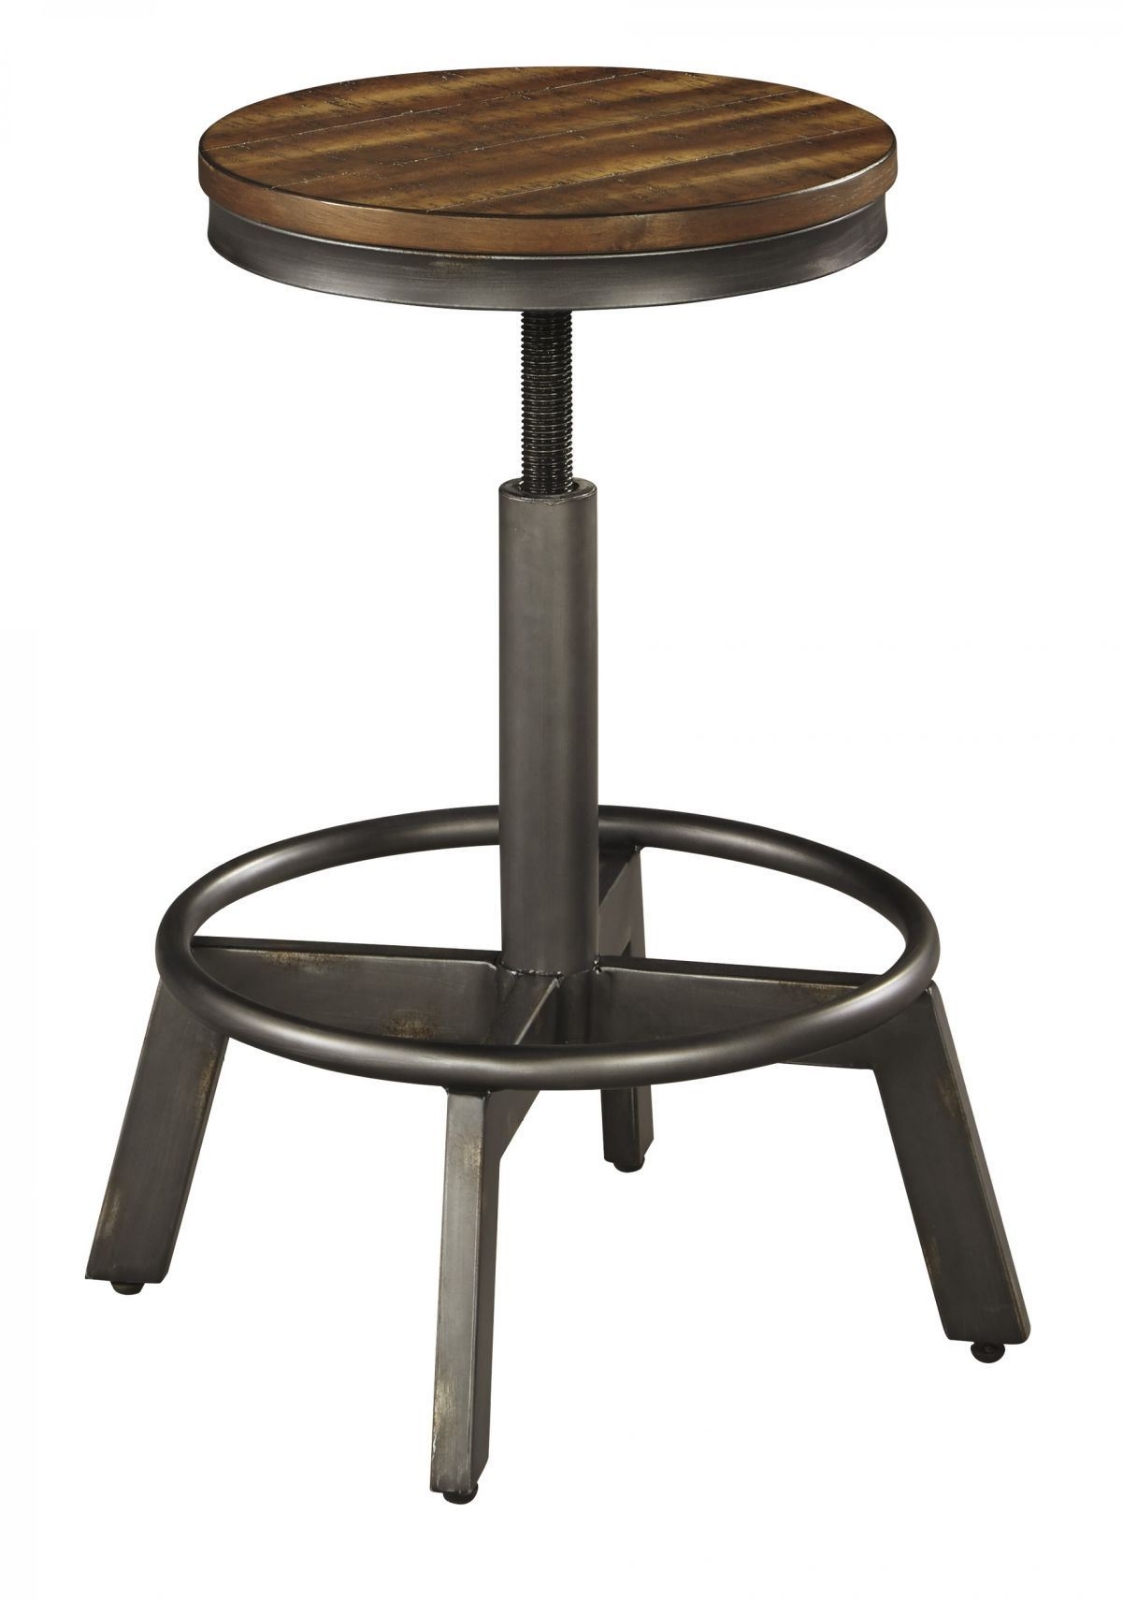 Picture of Torjin Counter Stool